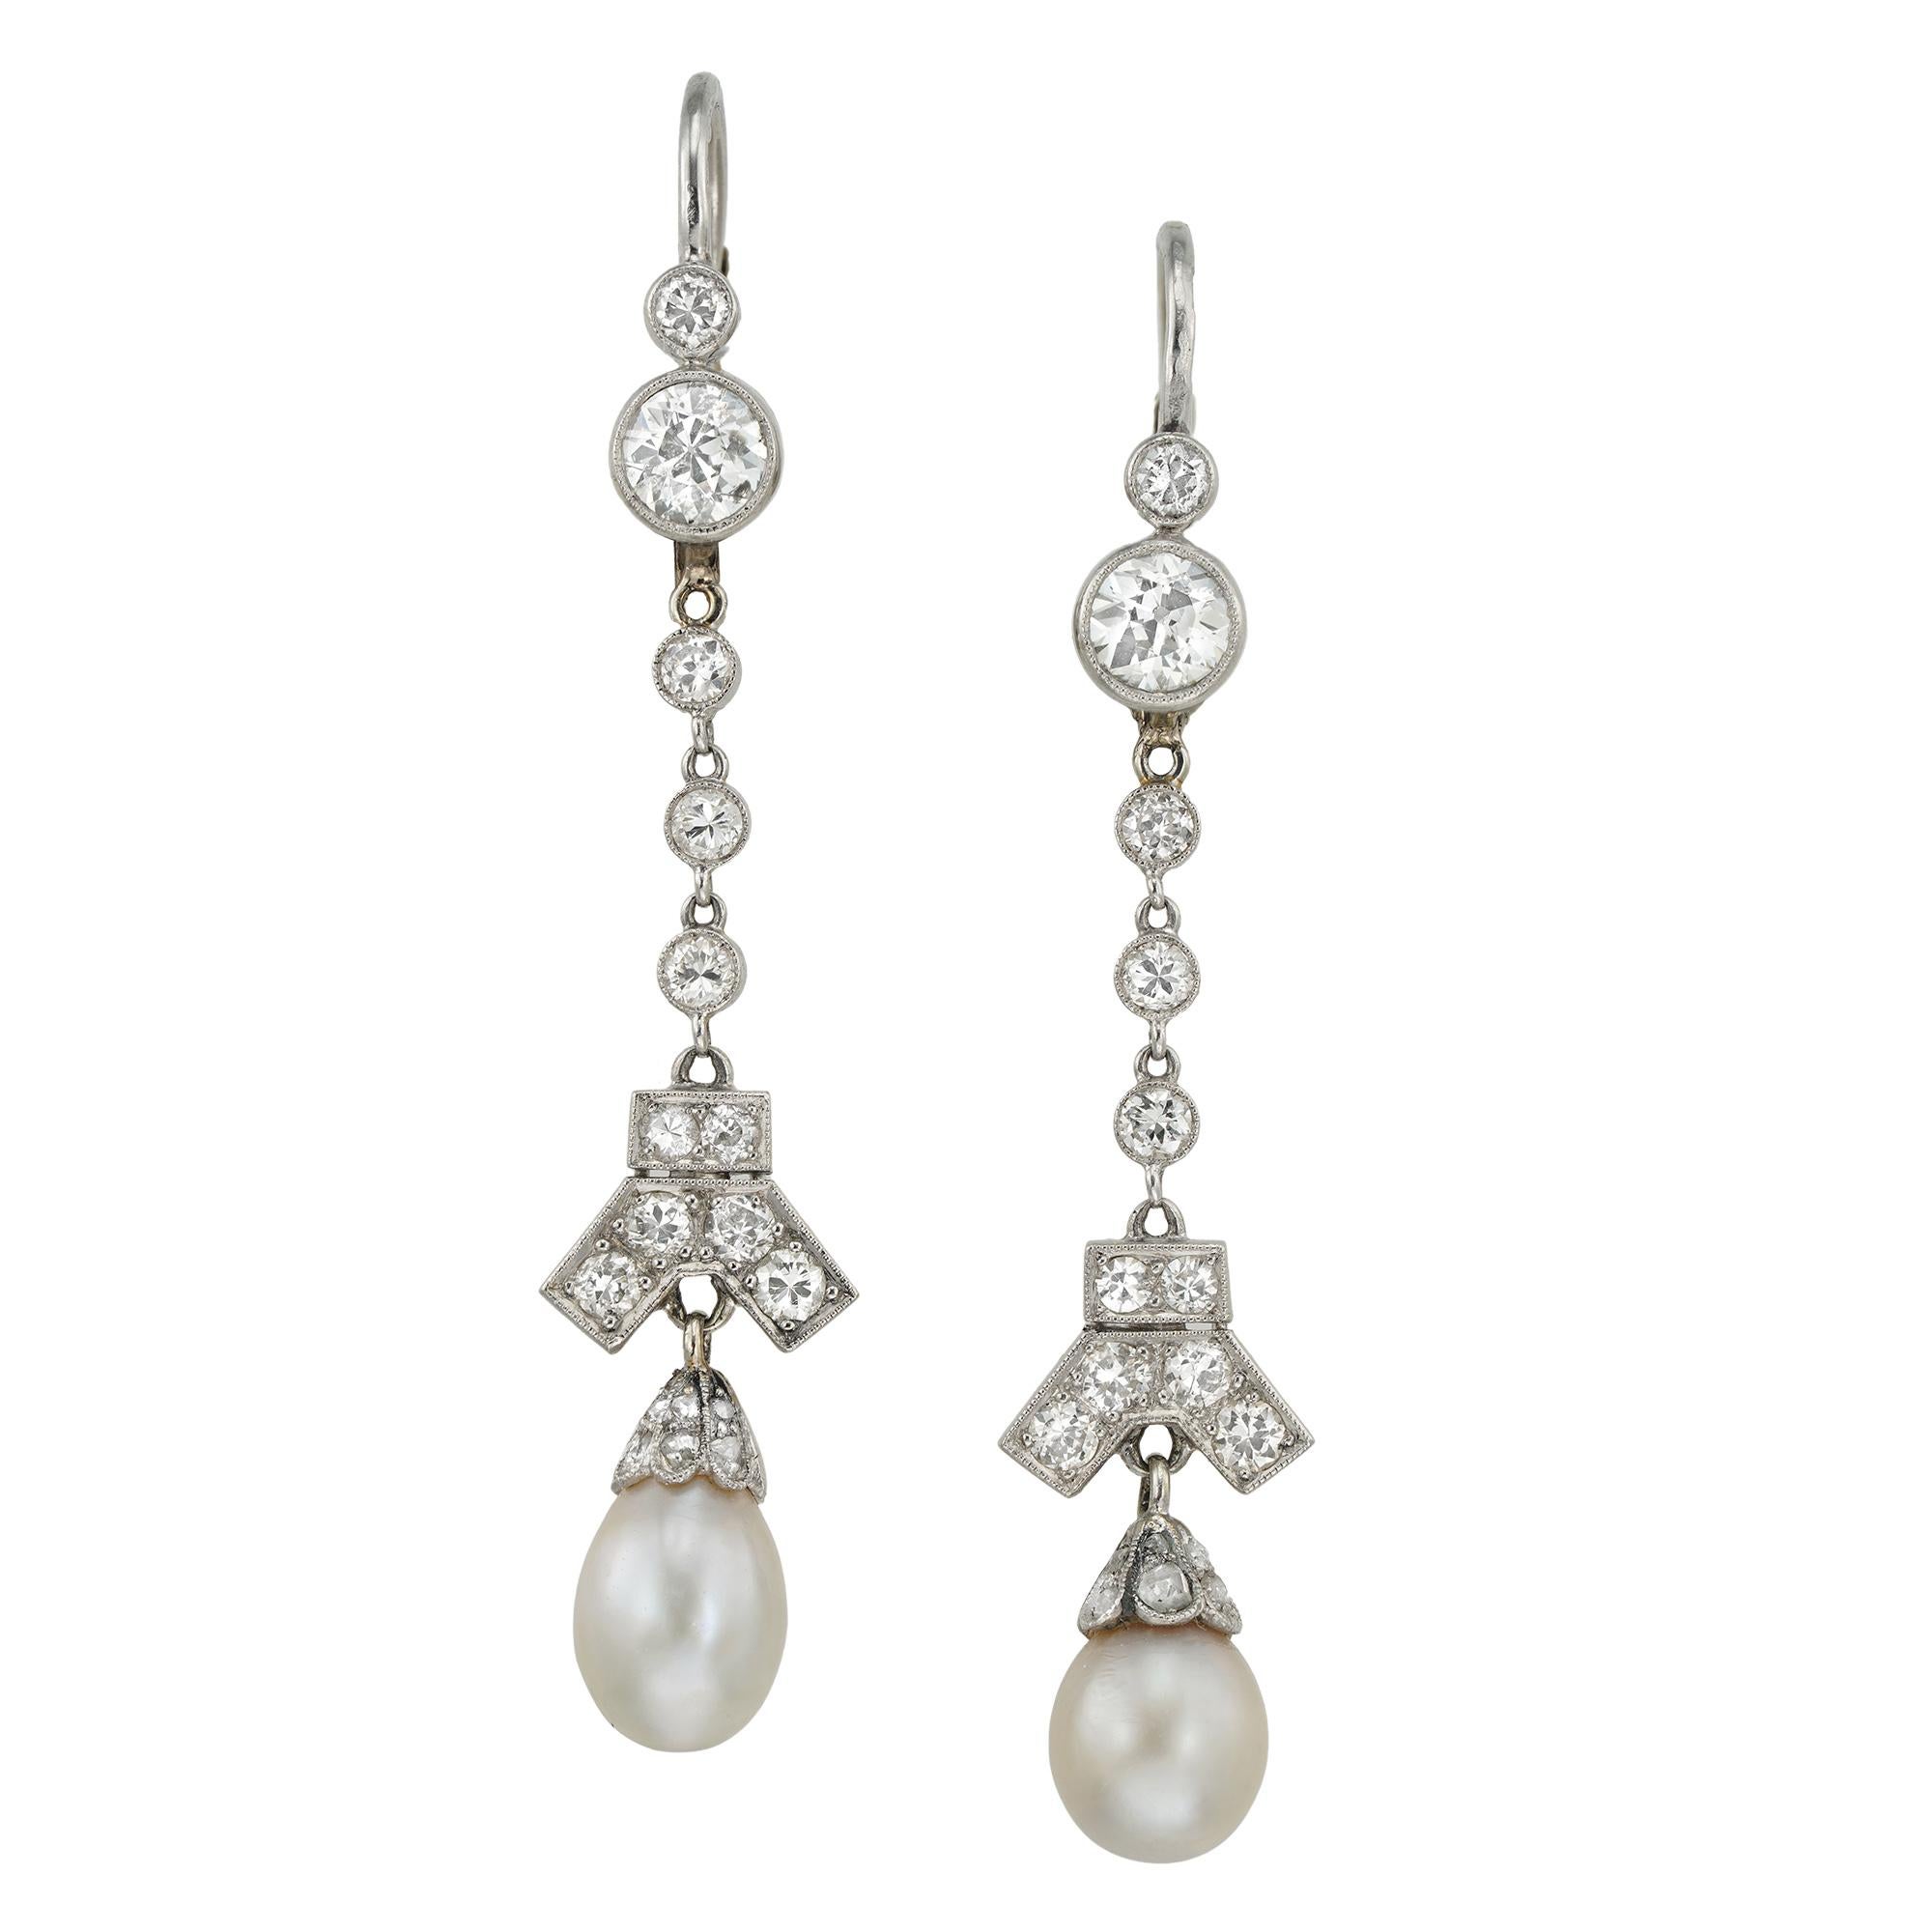 A pair of Art Deco natural pearl and diamond drop earrings, each consisting of two old brilliant-cut diamond-set top, suspending a line of three smaller old-brilliant-cut diamonds, with a Y-shaped diamond-set decoration terminating to a natural